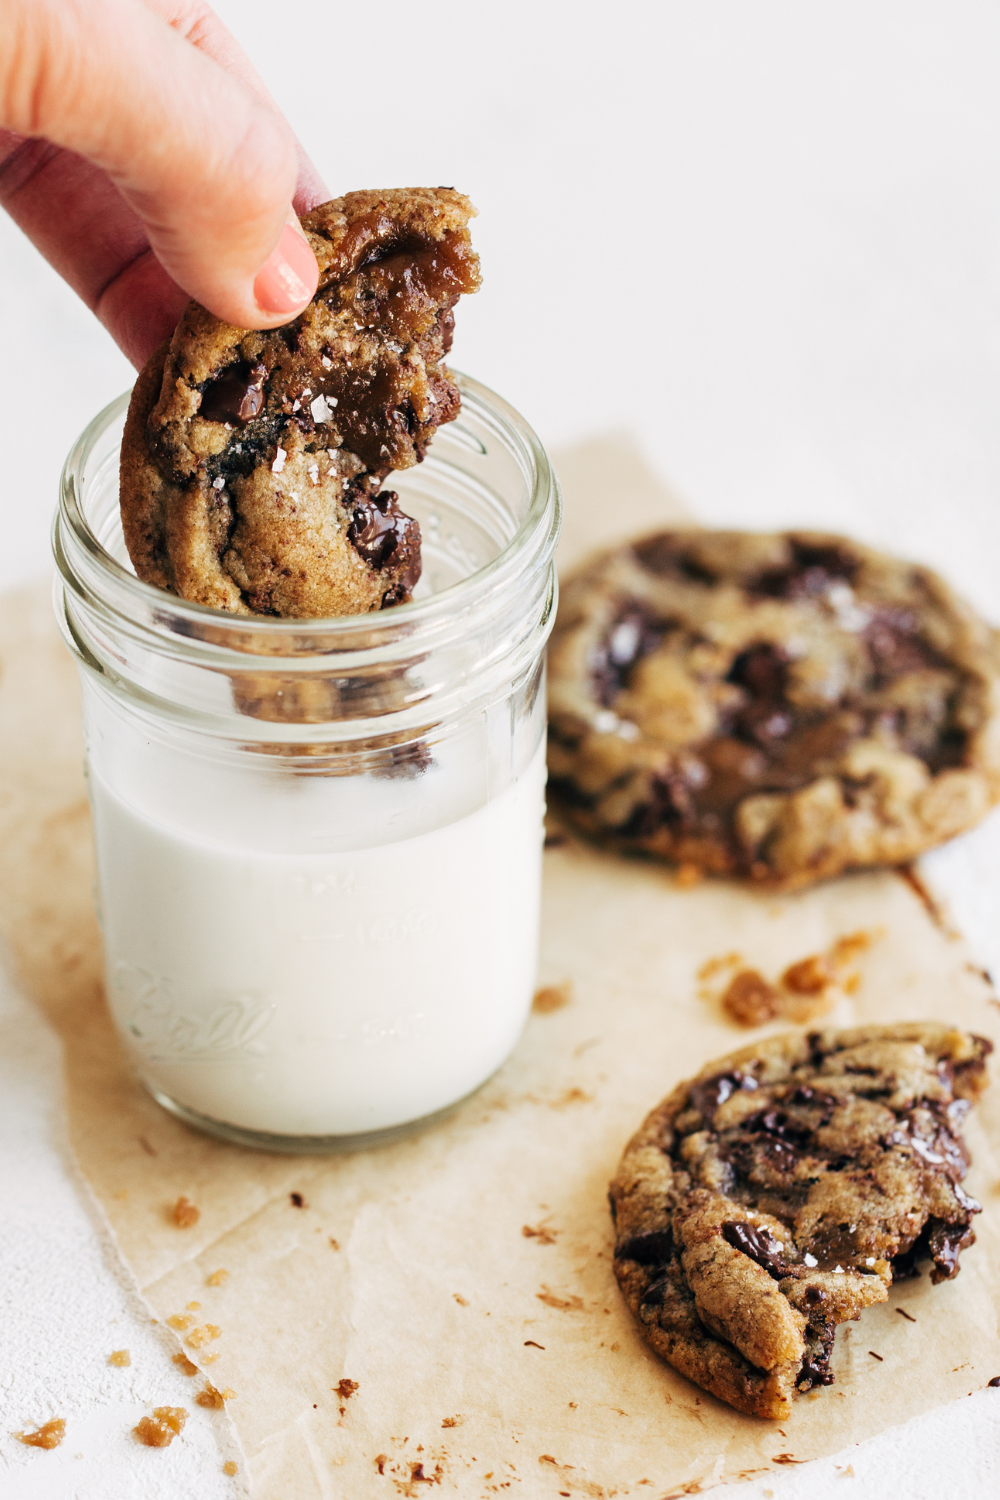 The Best Chocolate Chip Cookies Use Toasted Milk Powder - A Little Spoon